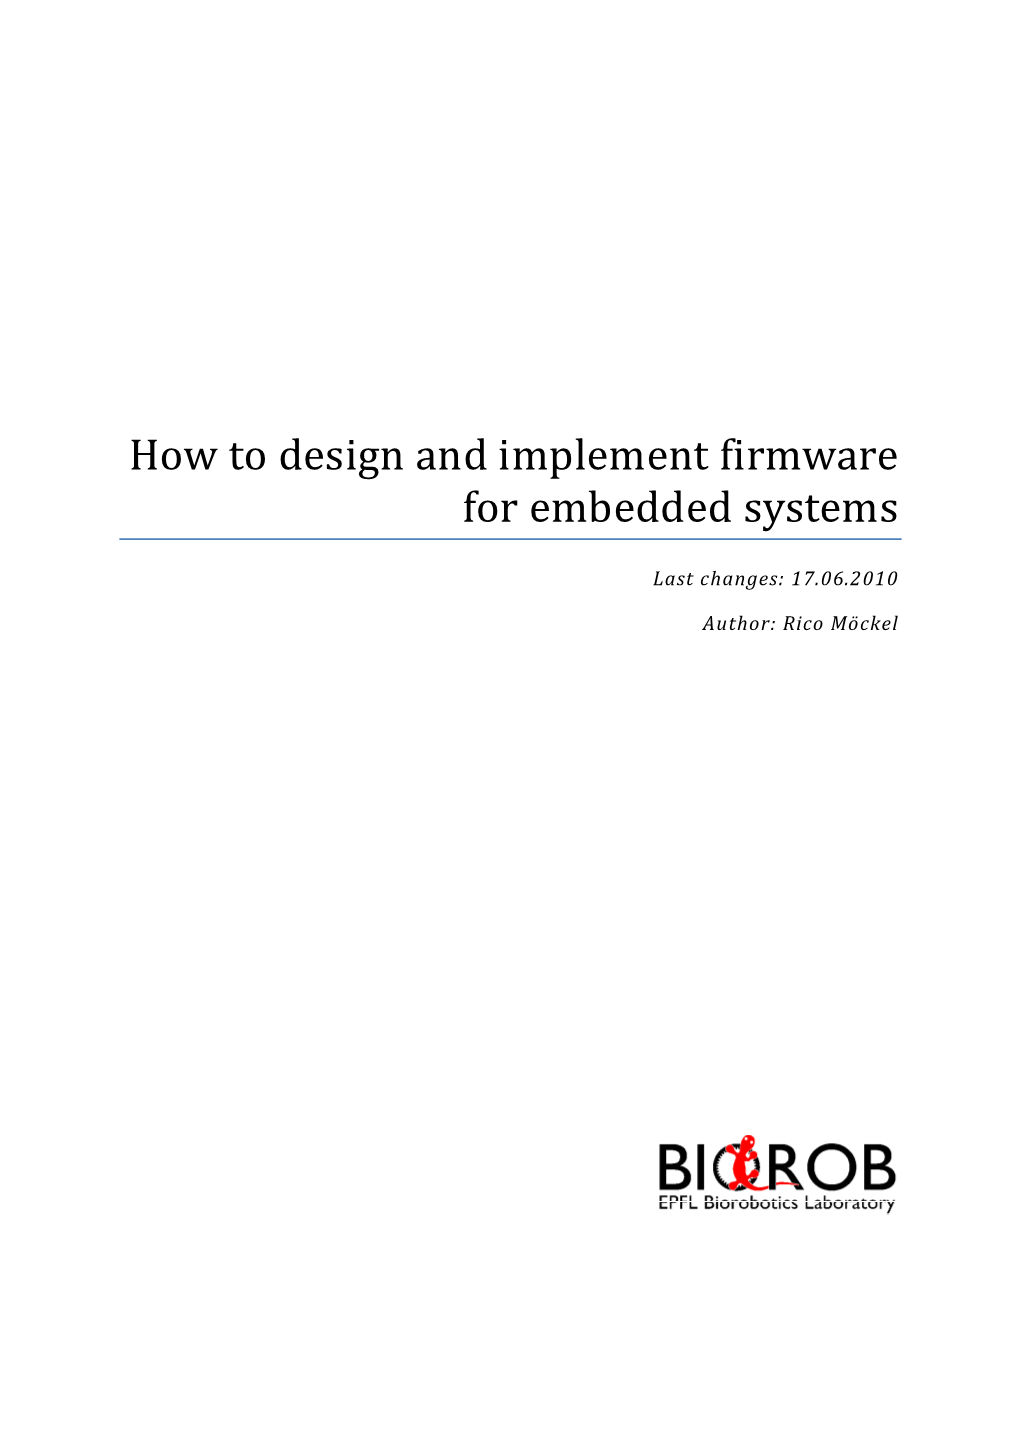 How to Design and Implement Firmware for Embedded Systems